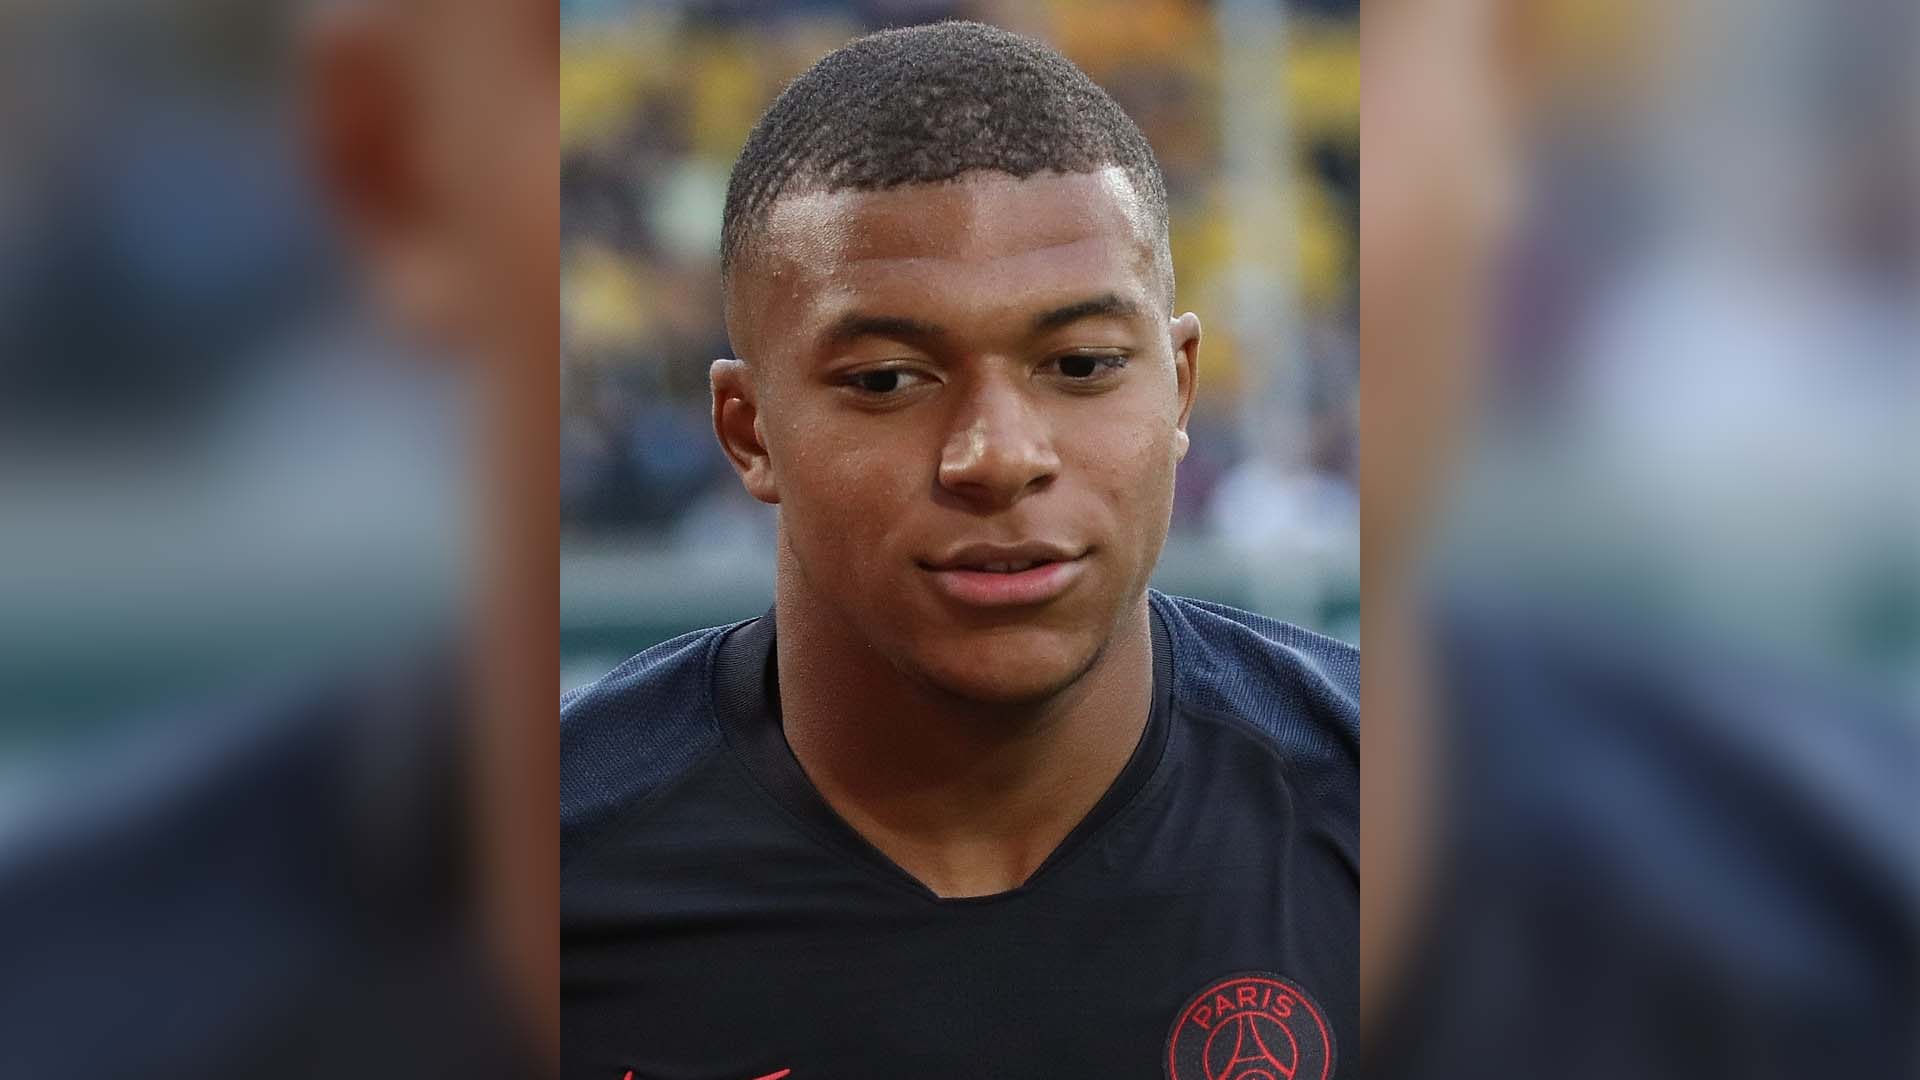 Mbappé's Masked Challenge: The Struggles and Determination of a Football Star